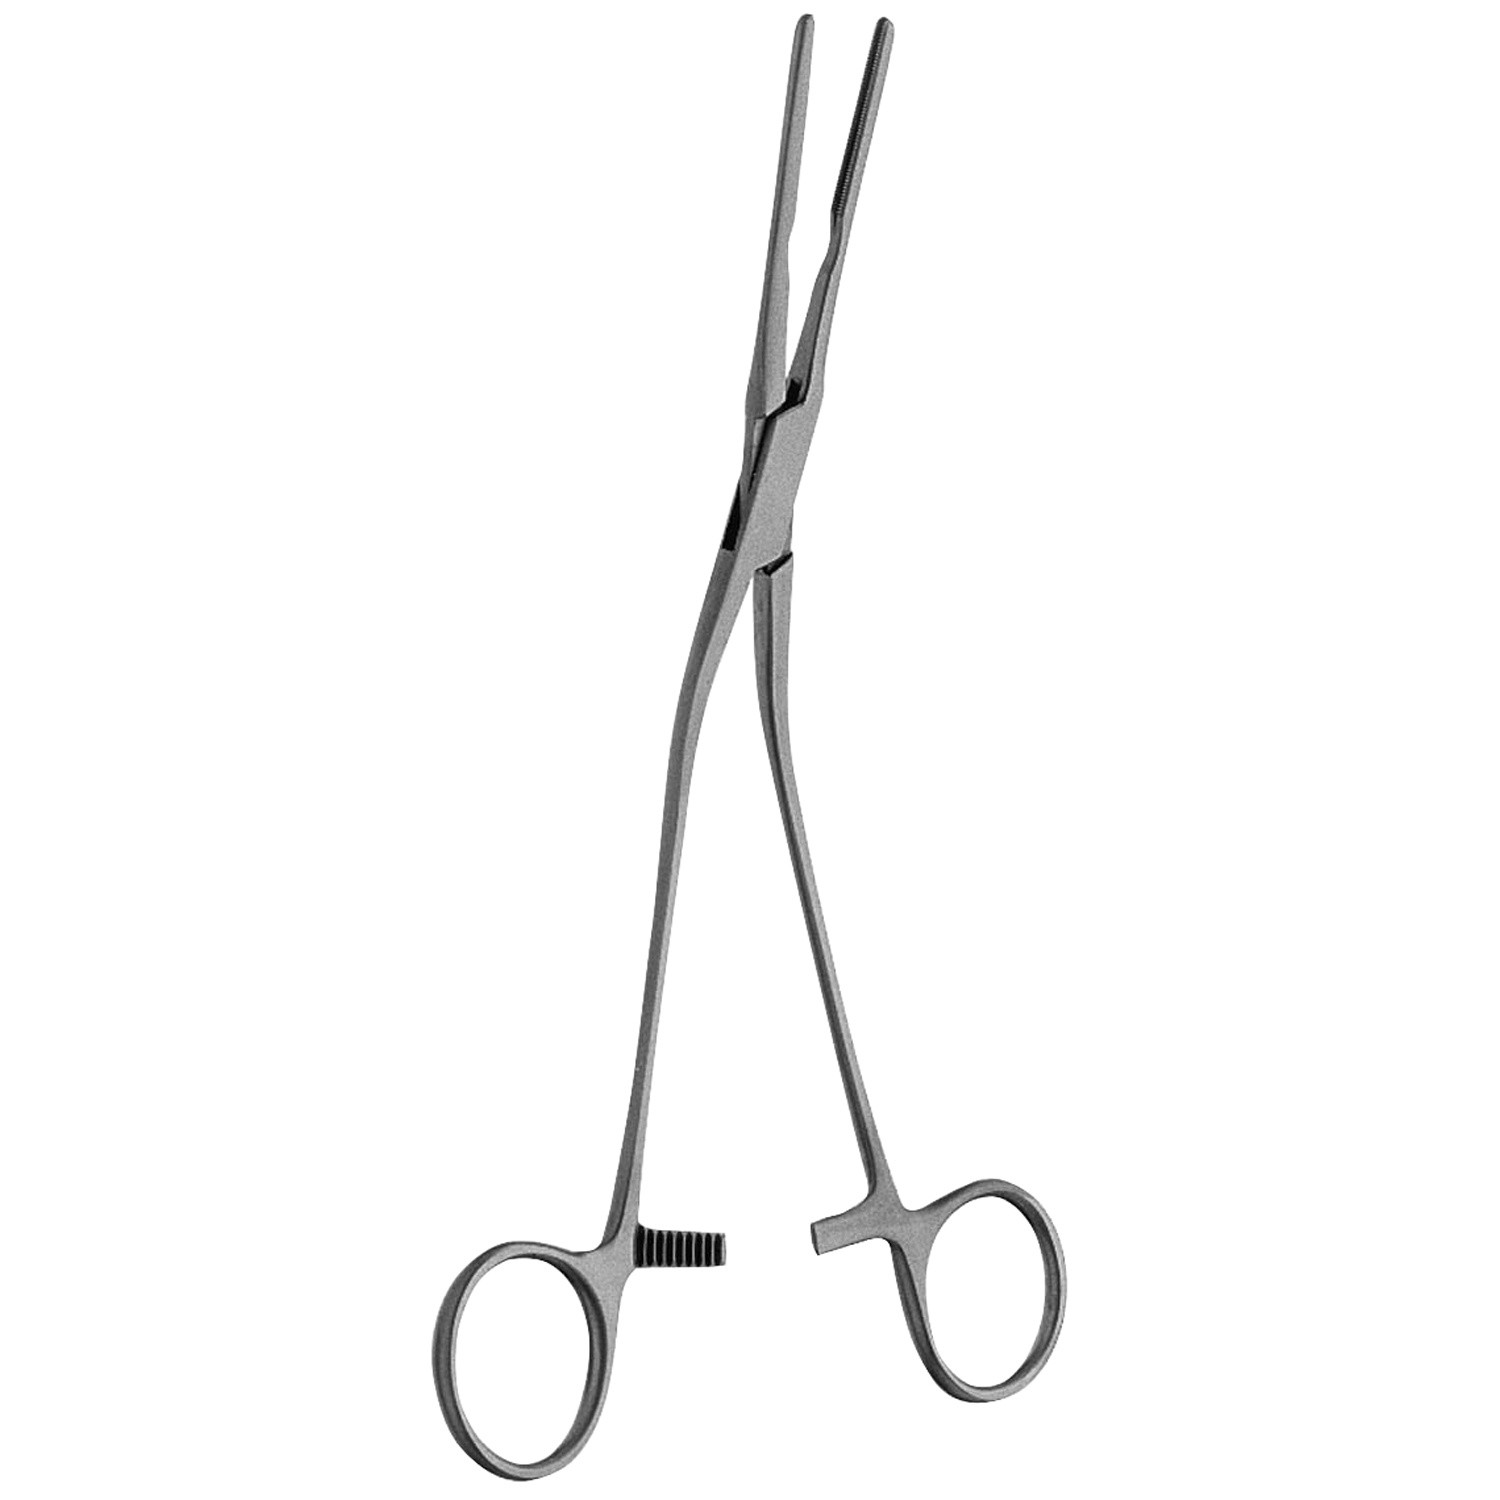 Debakey Patent Ductus & Peripheral Vascular Clamp, 3.0 Cm Long Straight Jaws, 8" (20.0 Cm), Angled Shanks